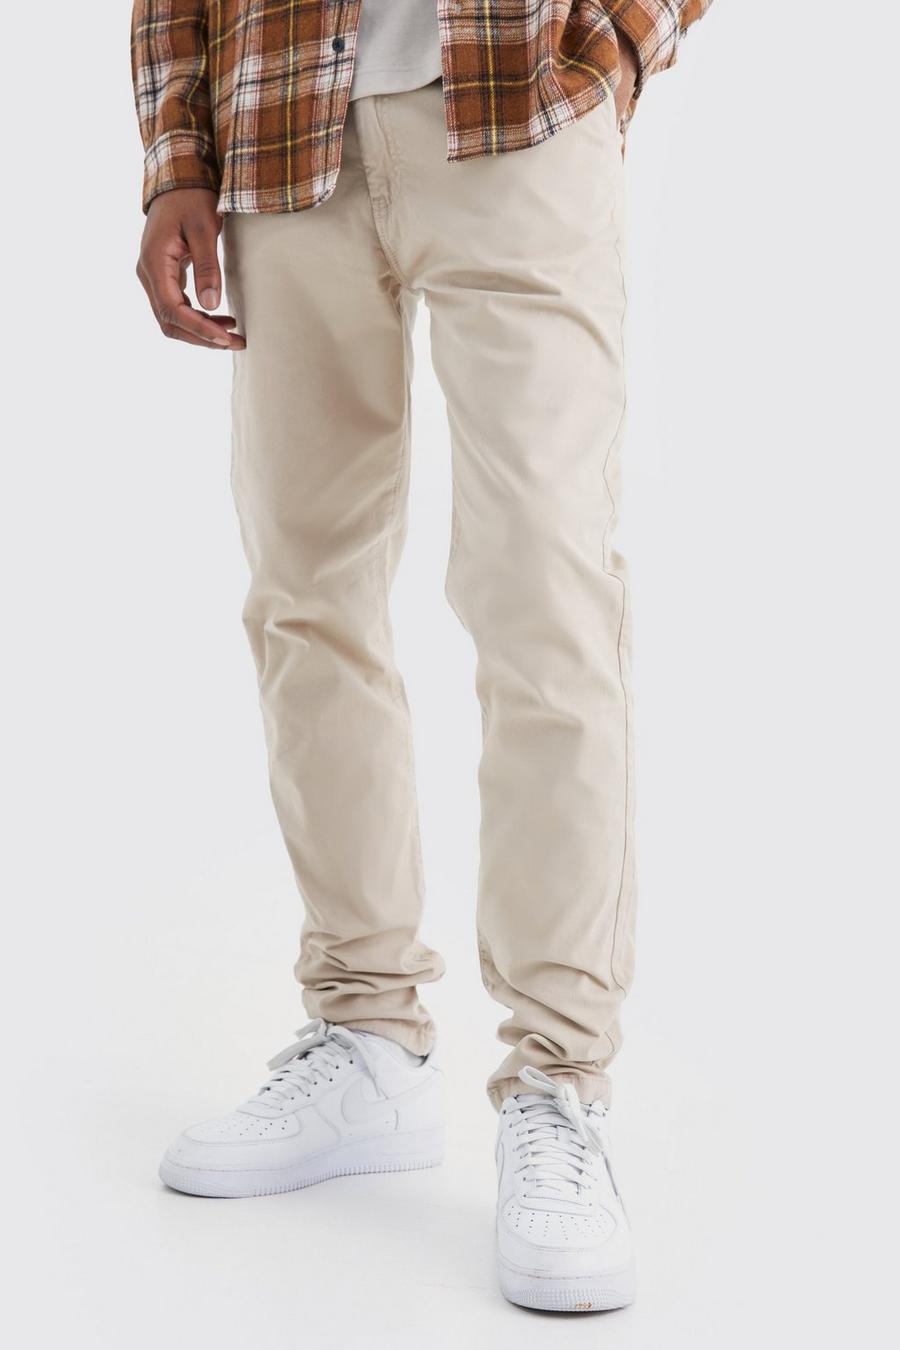 Stone Tall Slim Chino Trouser With Woven Tab